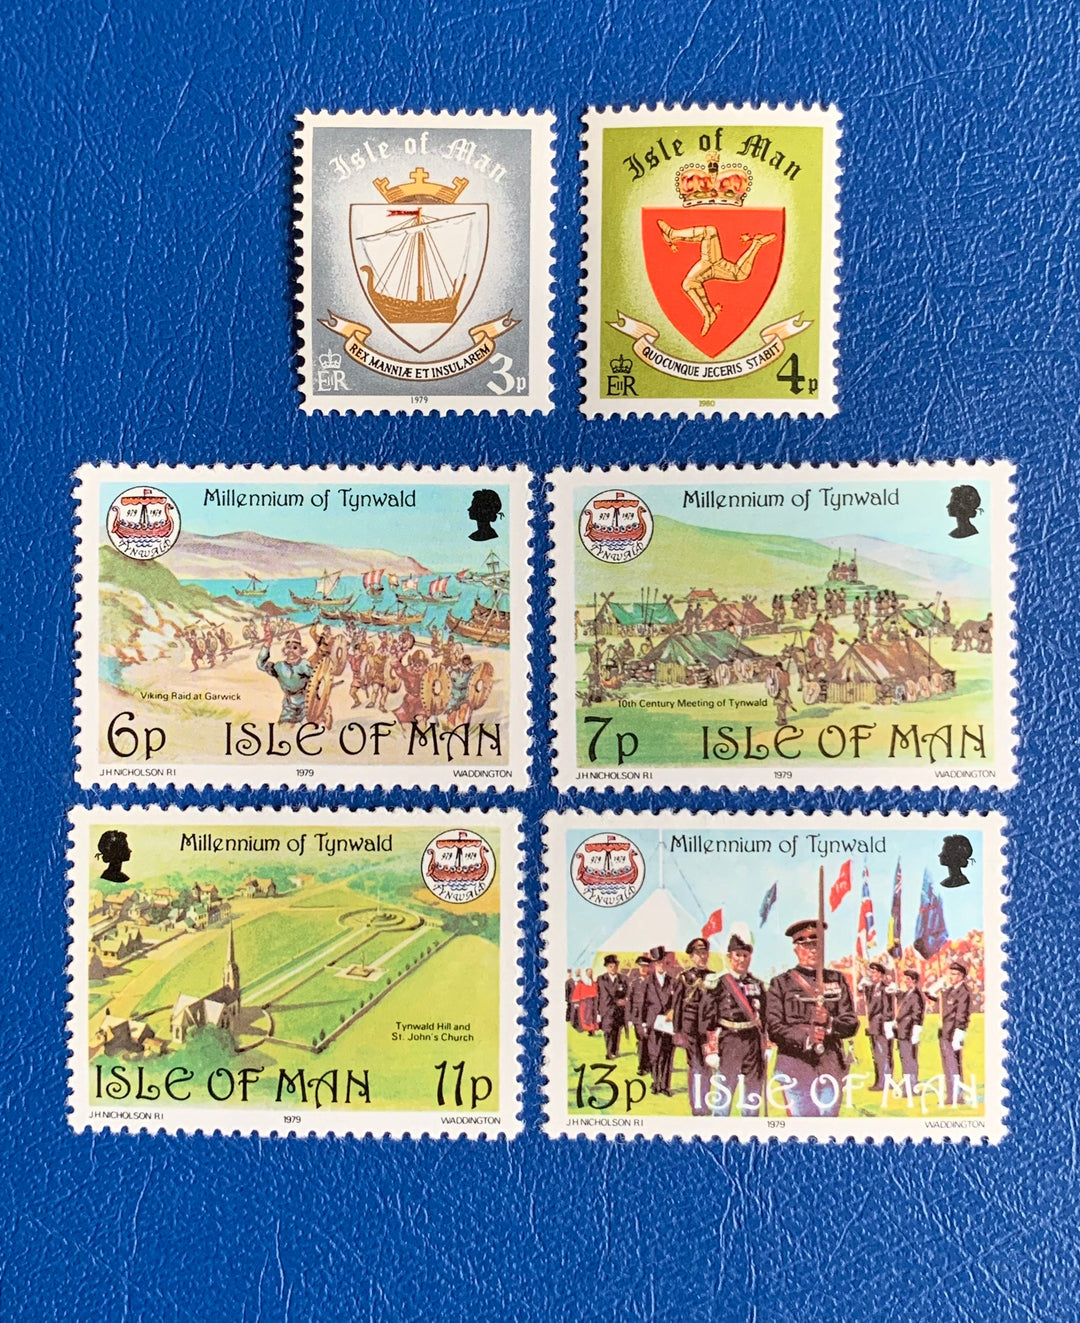 Isle of Man - Original Vintage Postage Stamps - 1978-80 - Millennium of Tynwald - for the collector, artist or crafter